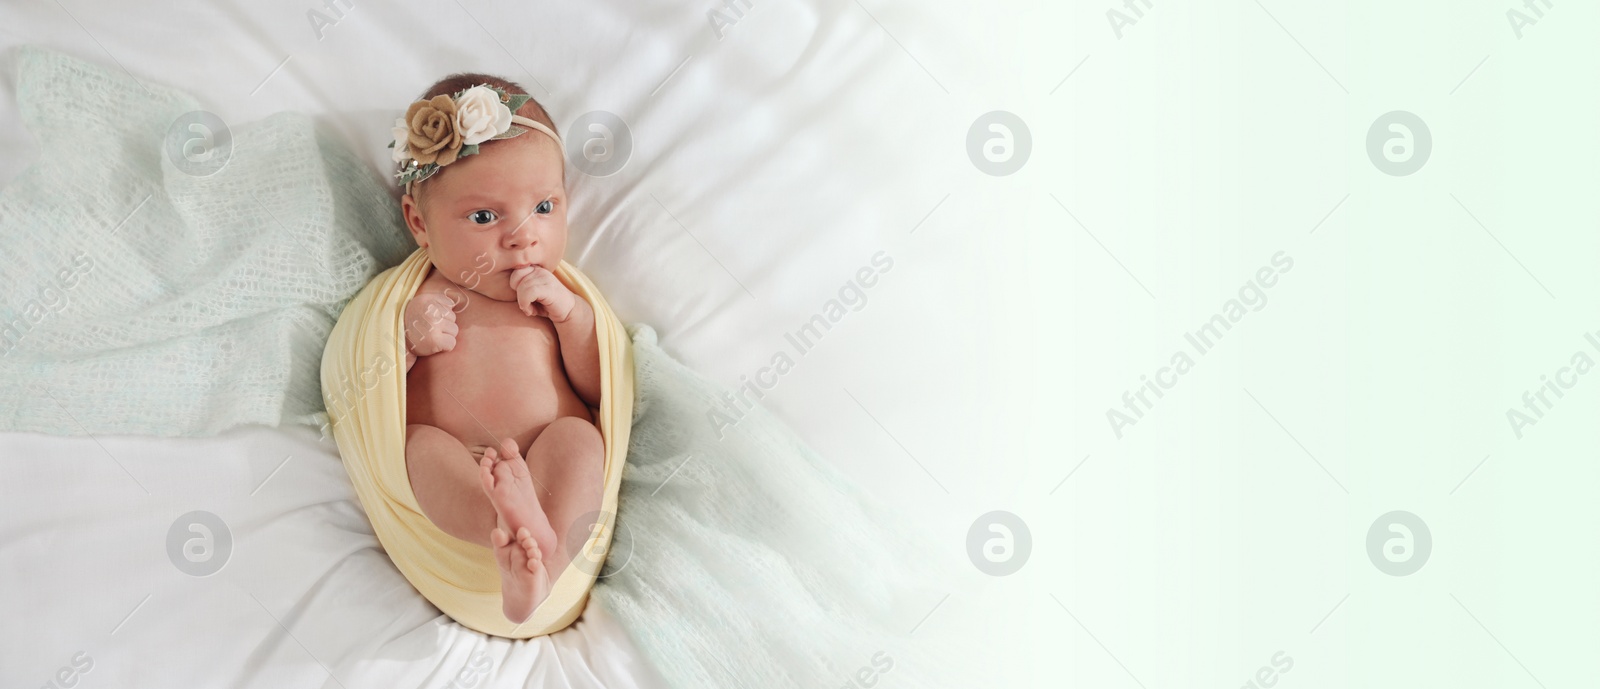 Image of Adorable newborn baby on bed, top view with space for text. Banner design